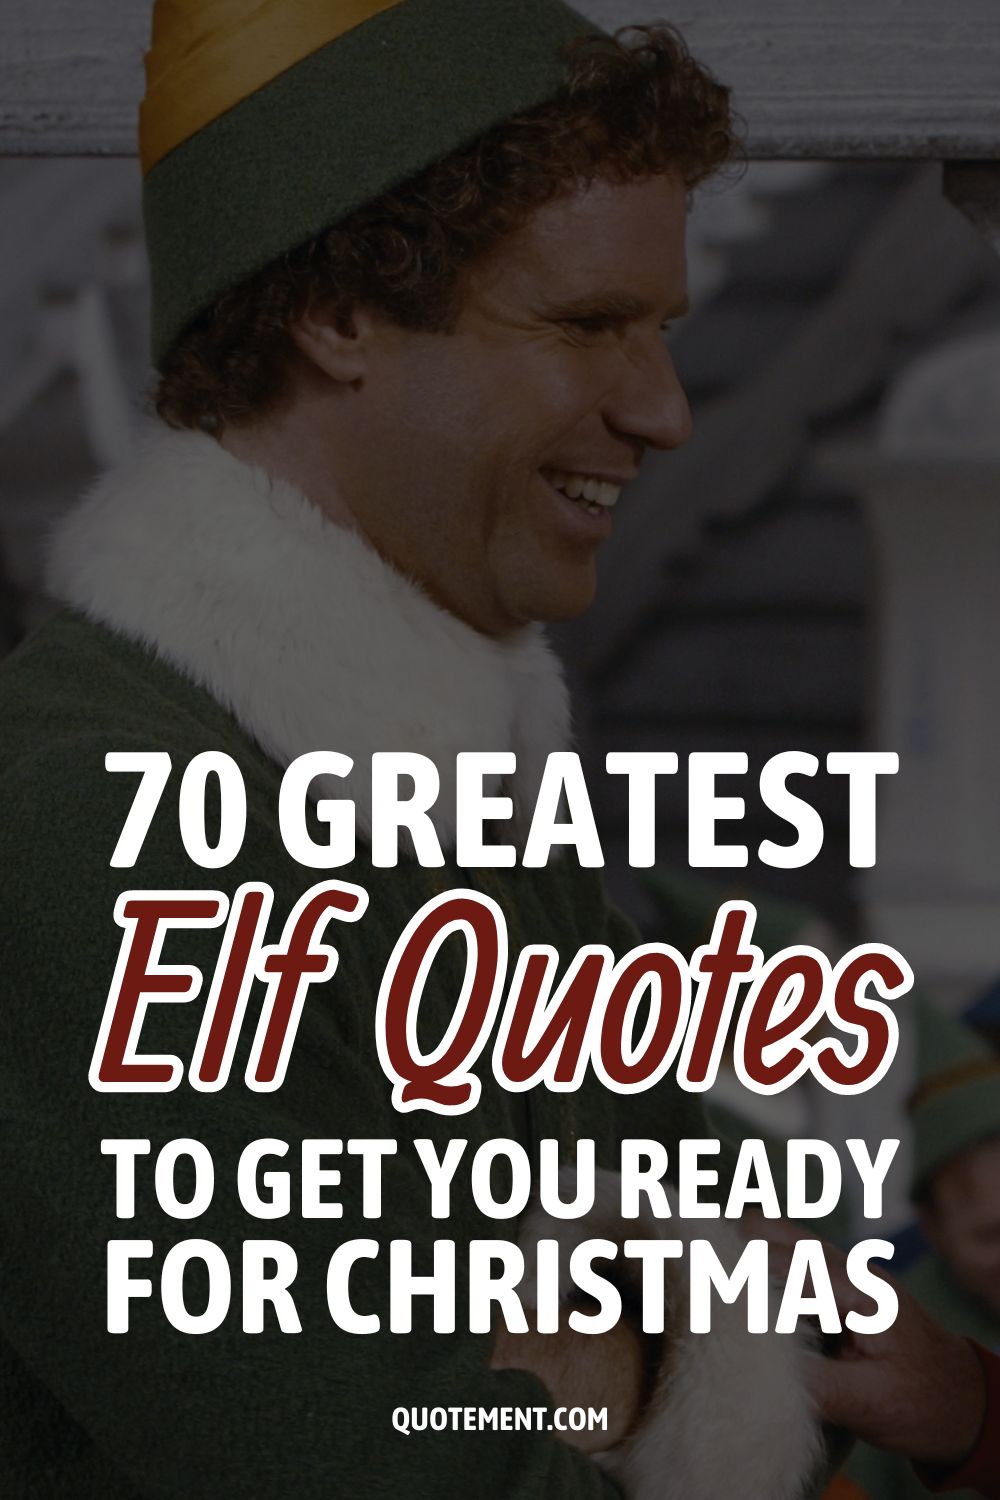 70 Greatest Elf Quotes To Get You Ready For Christmas